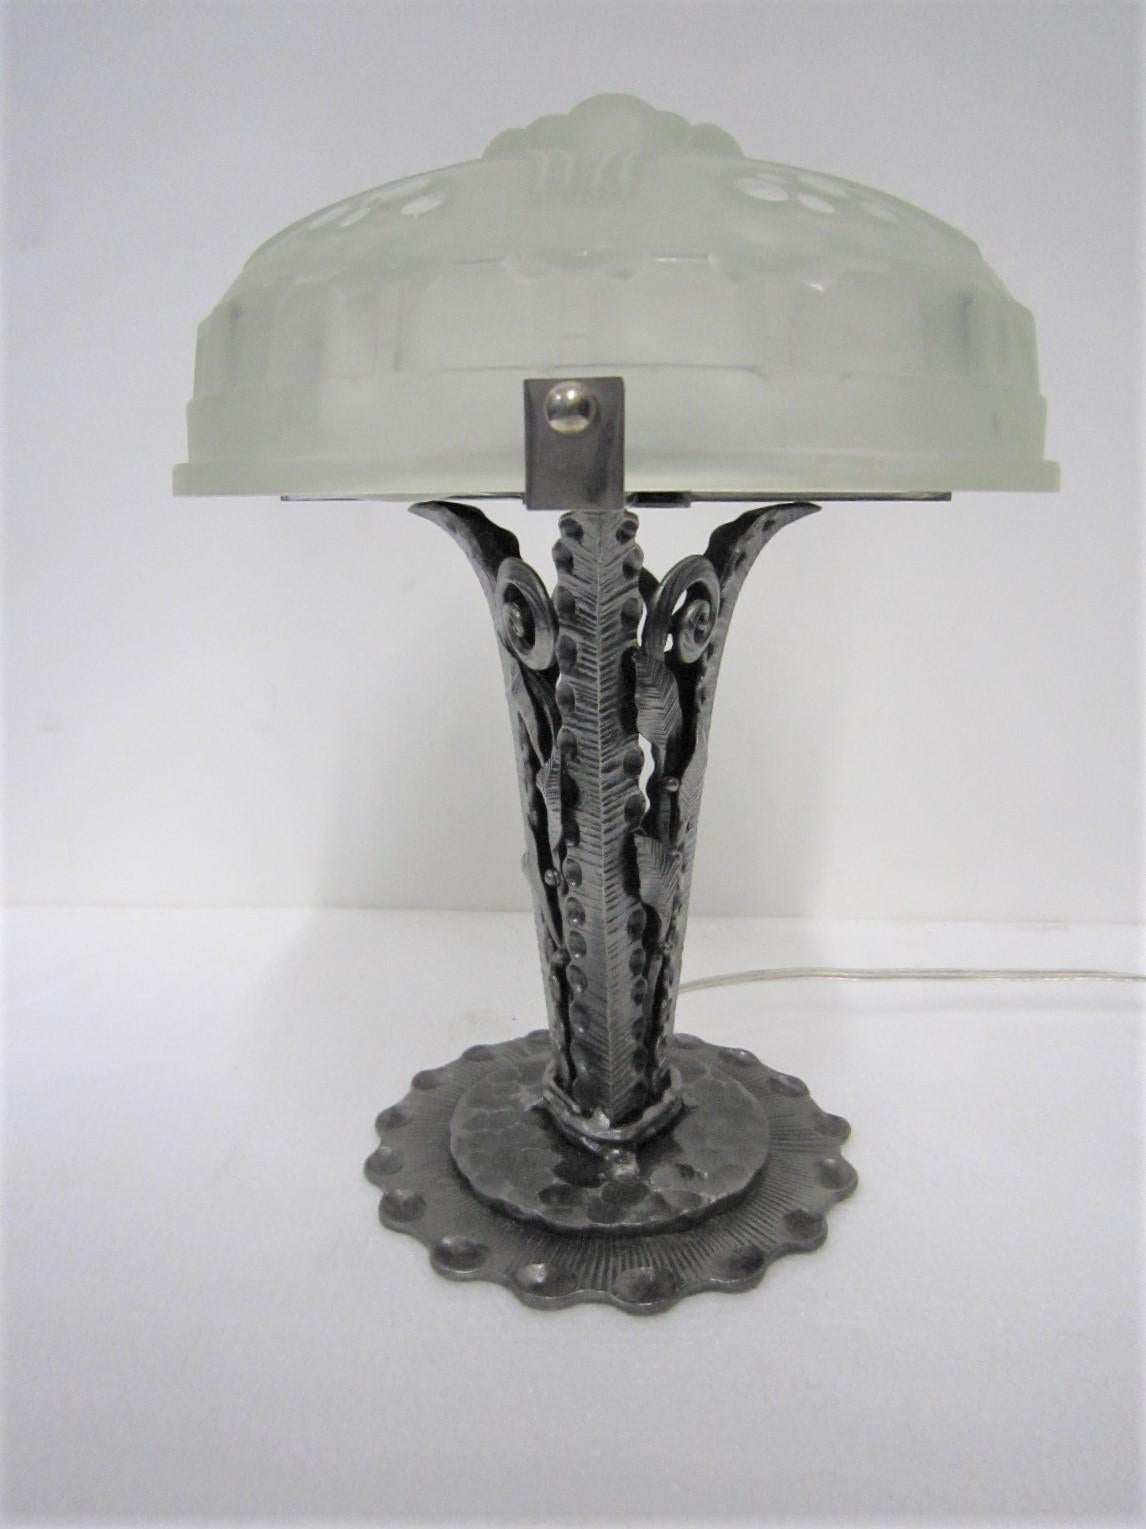 A French Art Deco table lamp signed Sabino
Marius Ernest Sabino (1878-1961)
The shade features Art Deco geometric patterns in frosted and polished art glass.
The glass is mounted on its original hand-hammered / fer forge, beautifully detailed